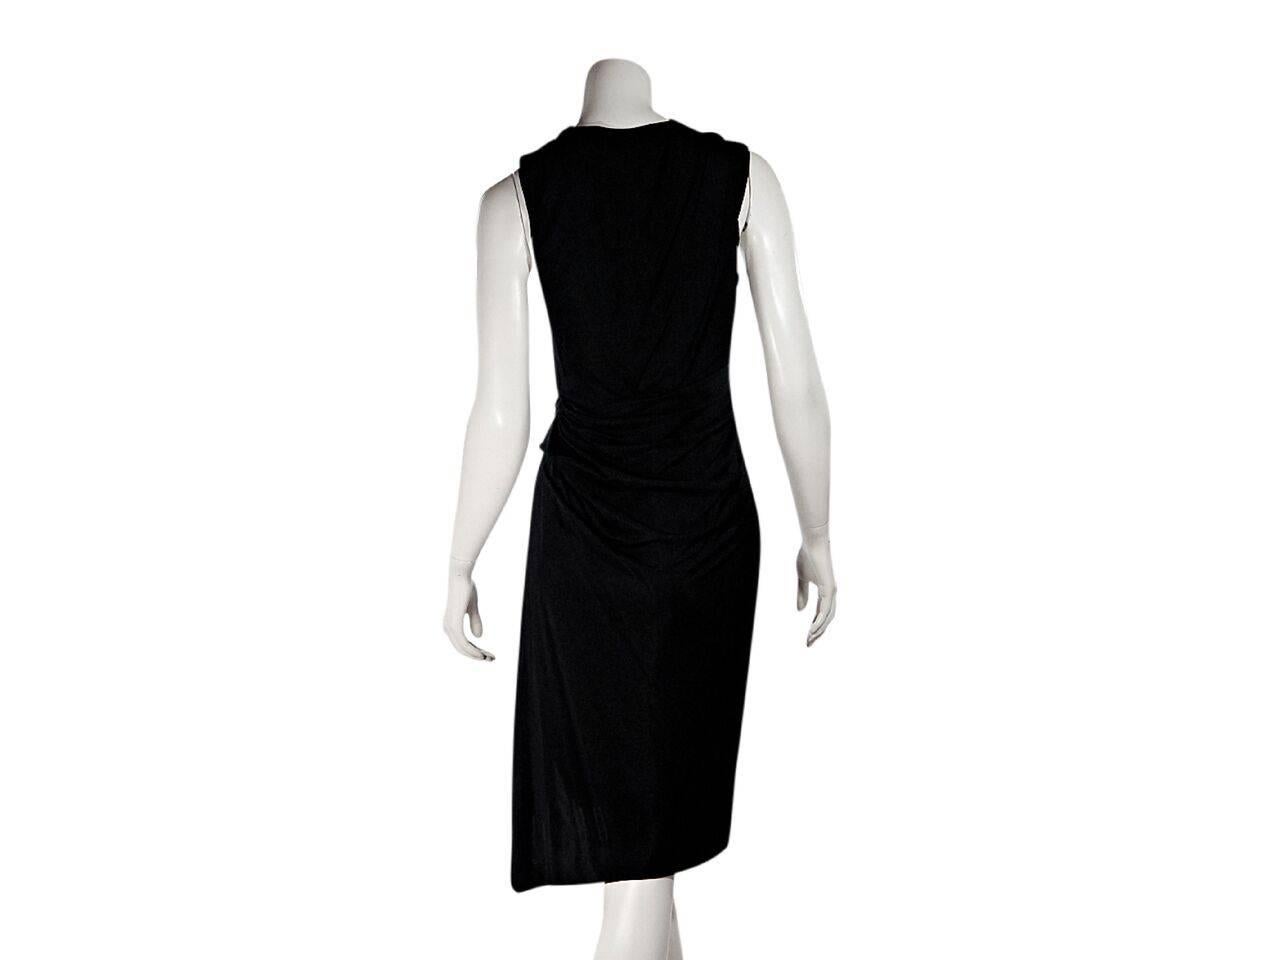 Product details:  Black draped jersey dress by Alexander Wang.  Crewneck.  Sleeveless.  Asymmetrical hem.  Pullover style. 
Condition: Pre-owned. New with tags.
Est. Retail $ 498.00